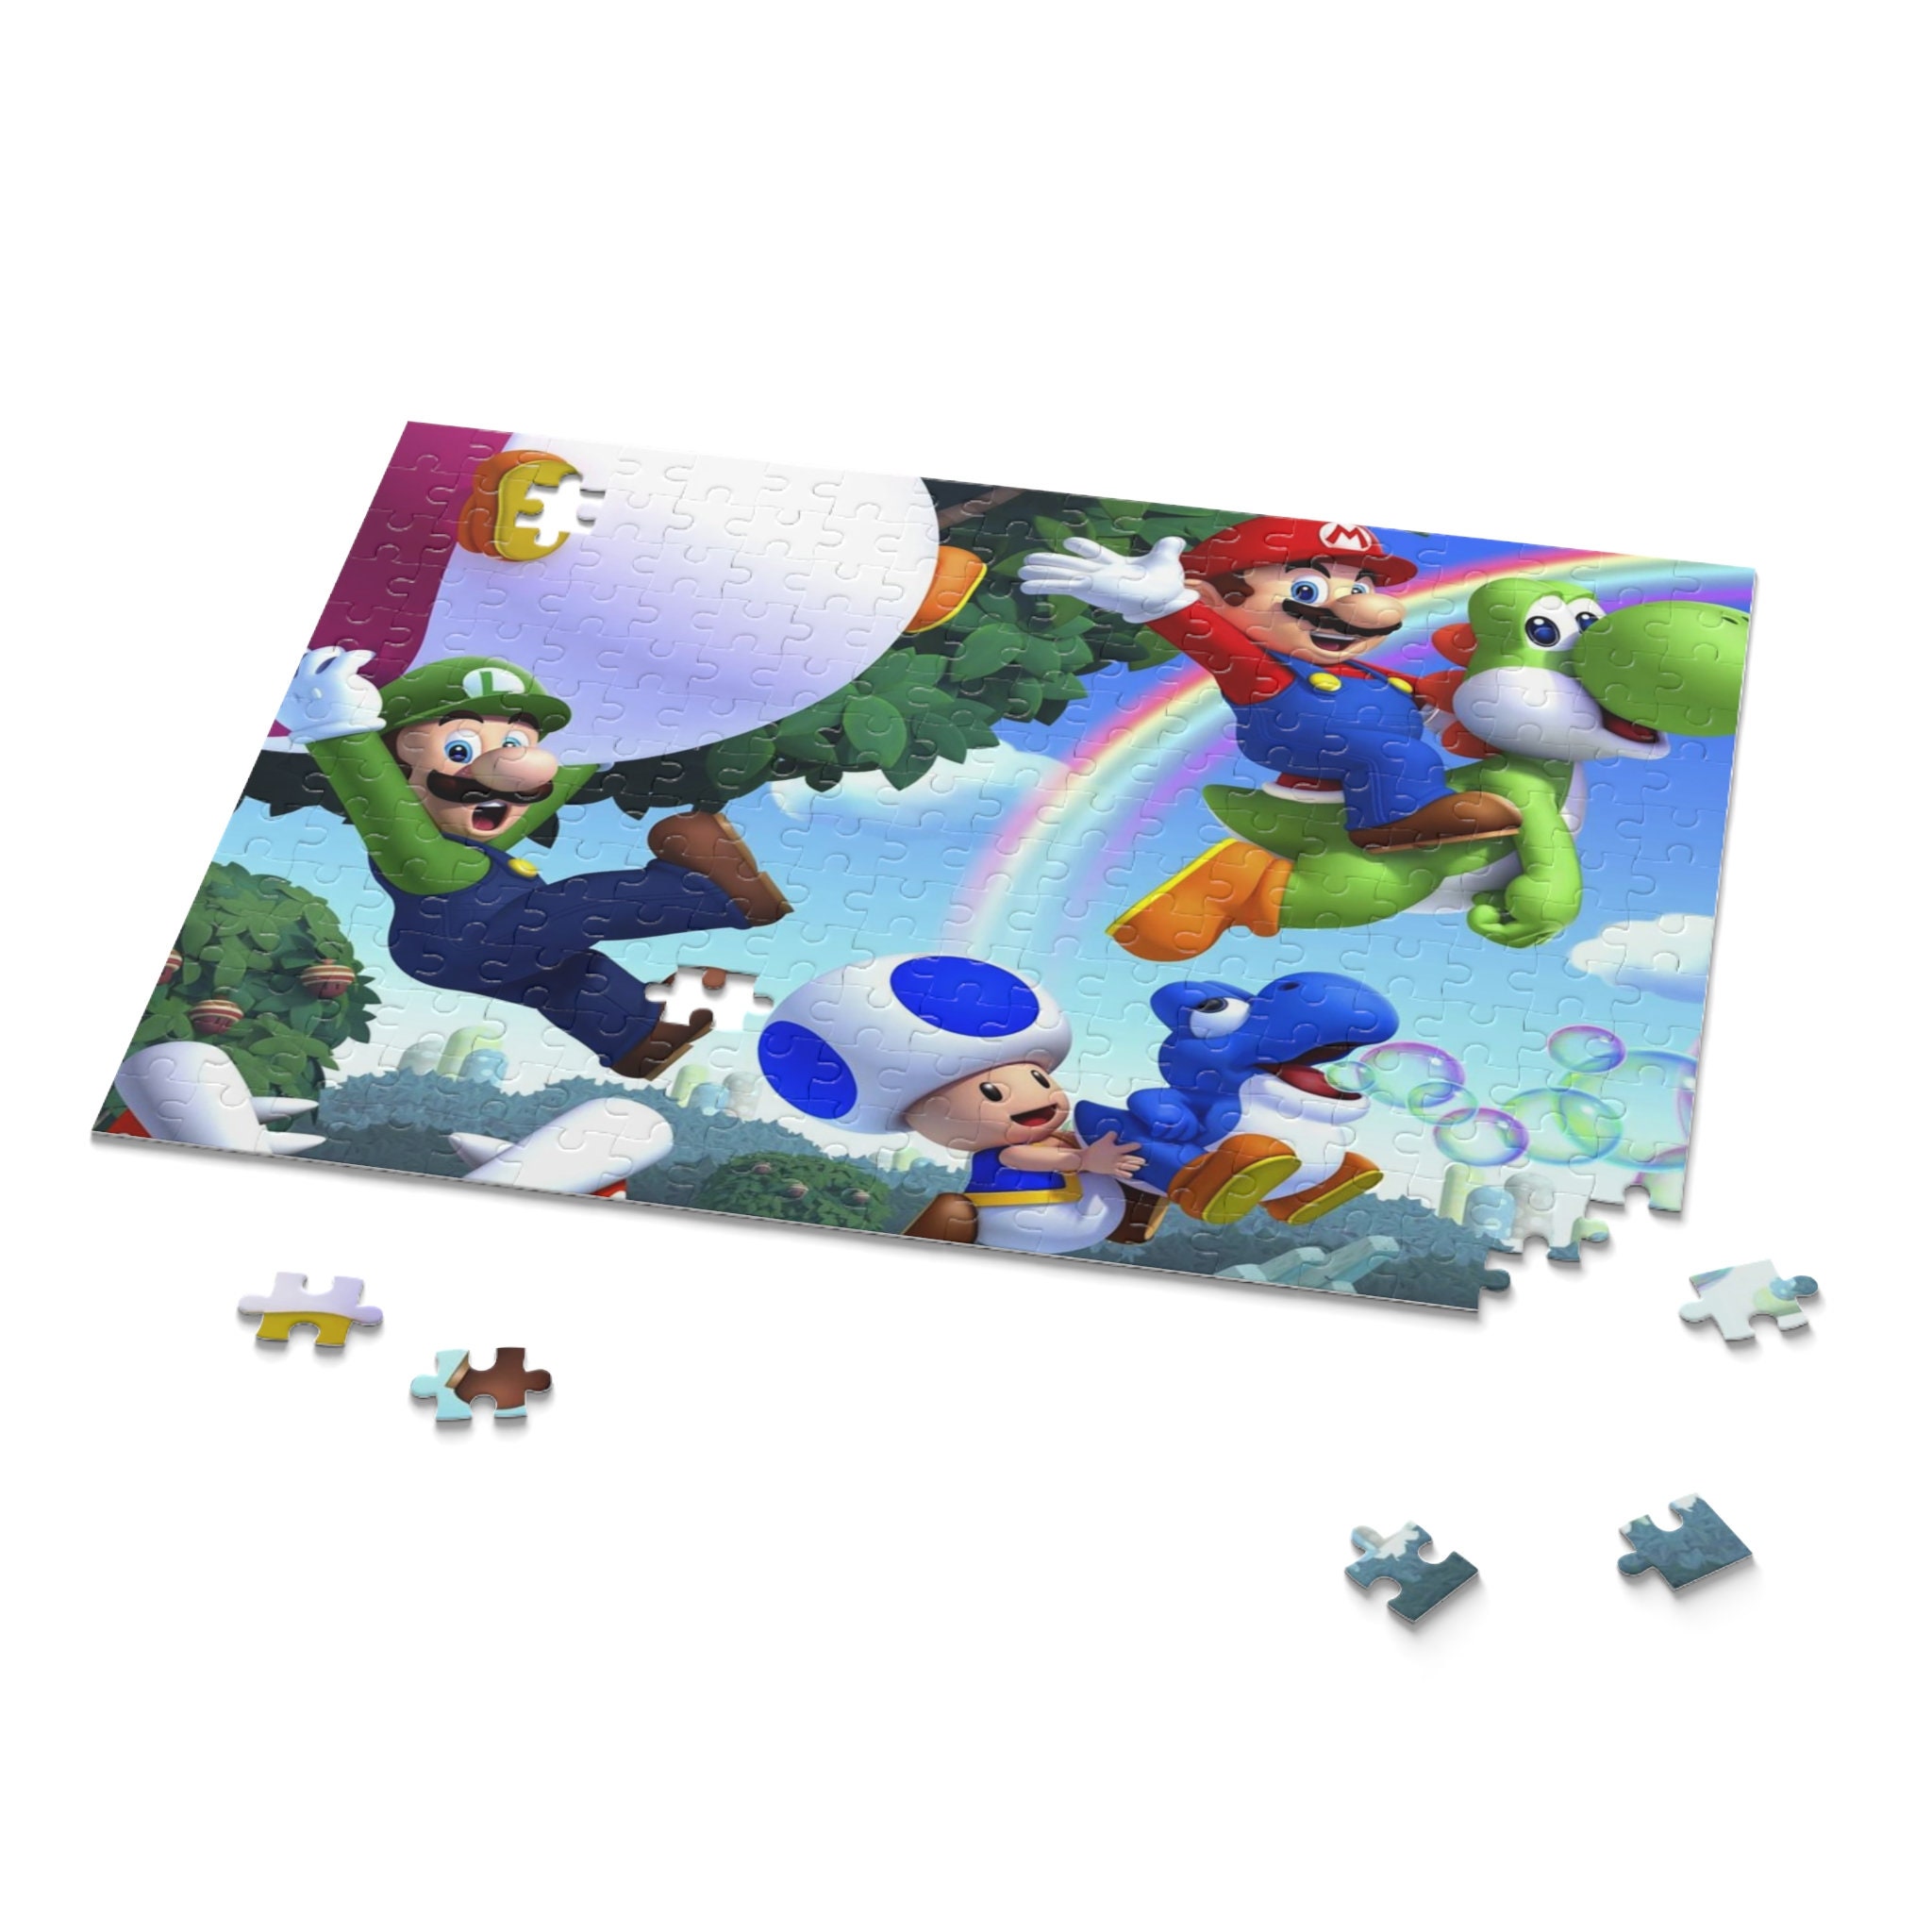 Doing a Super Mario Bros. 500 piece puzzle - Short, Sweet and SO